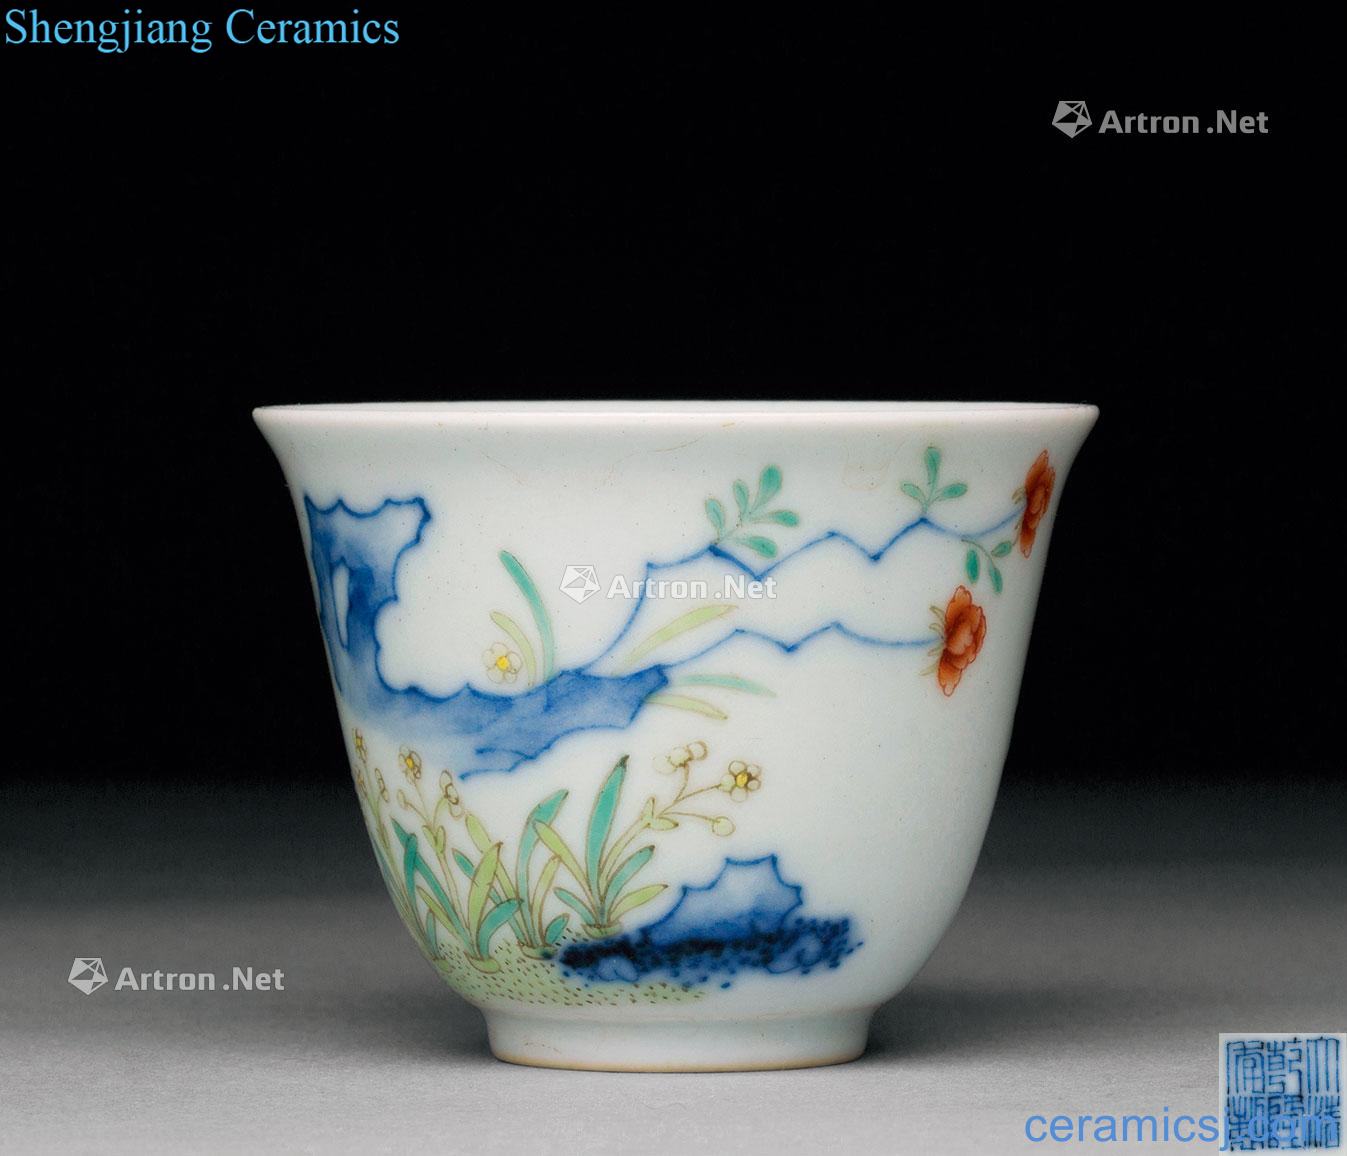 In the qing dynasty Blue and white decorated god cup